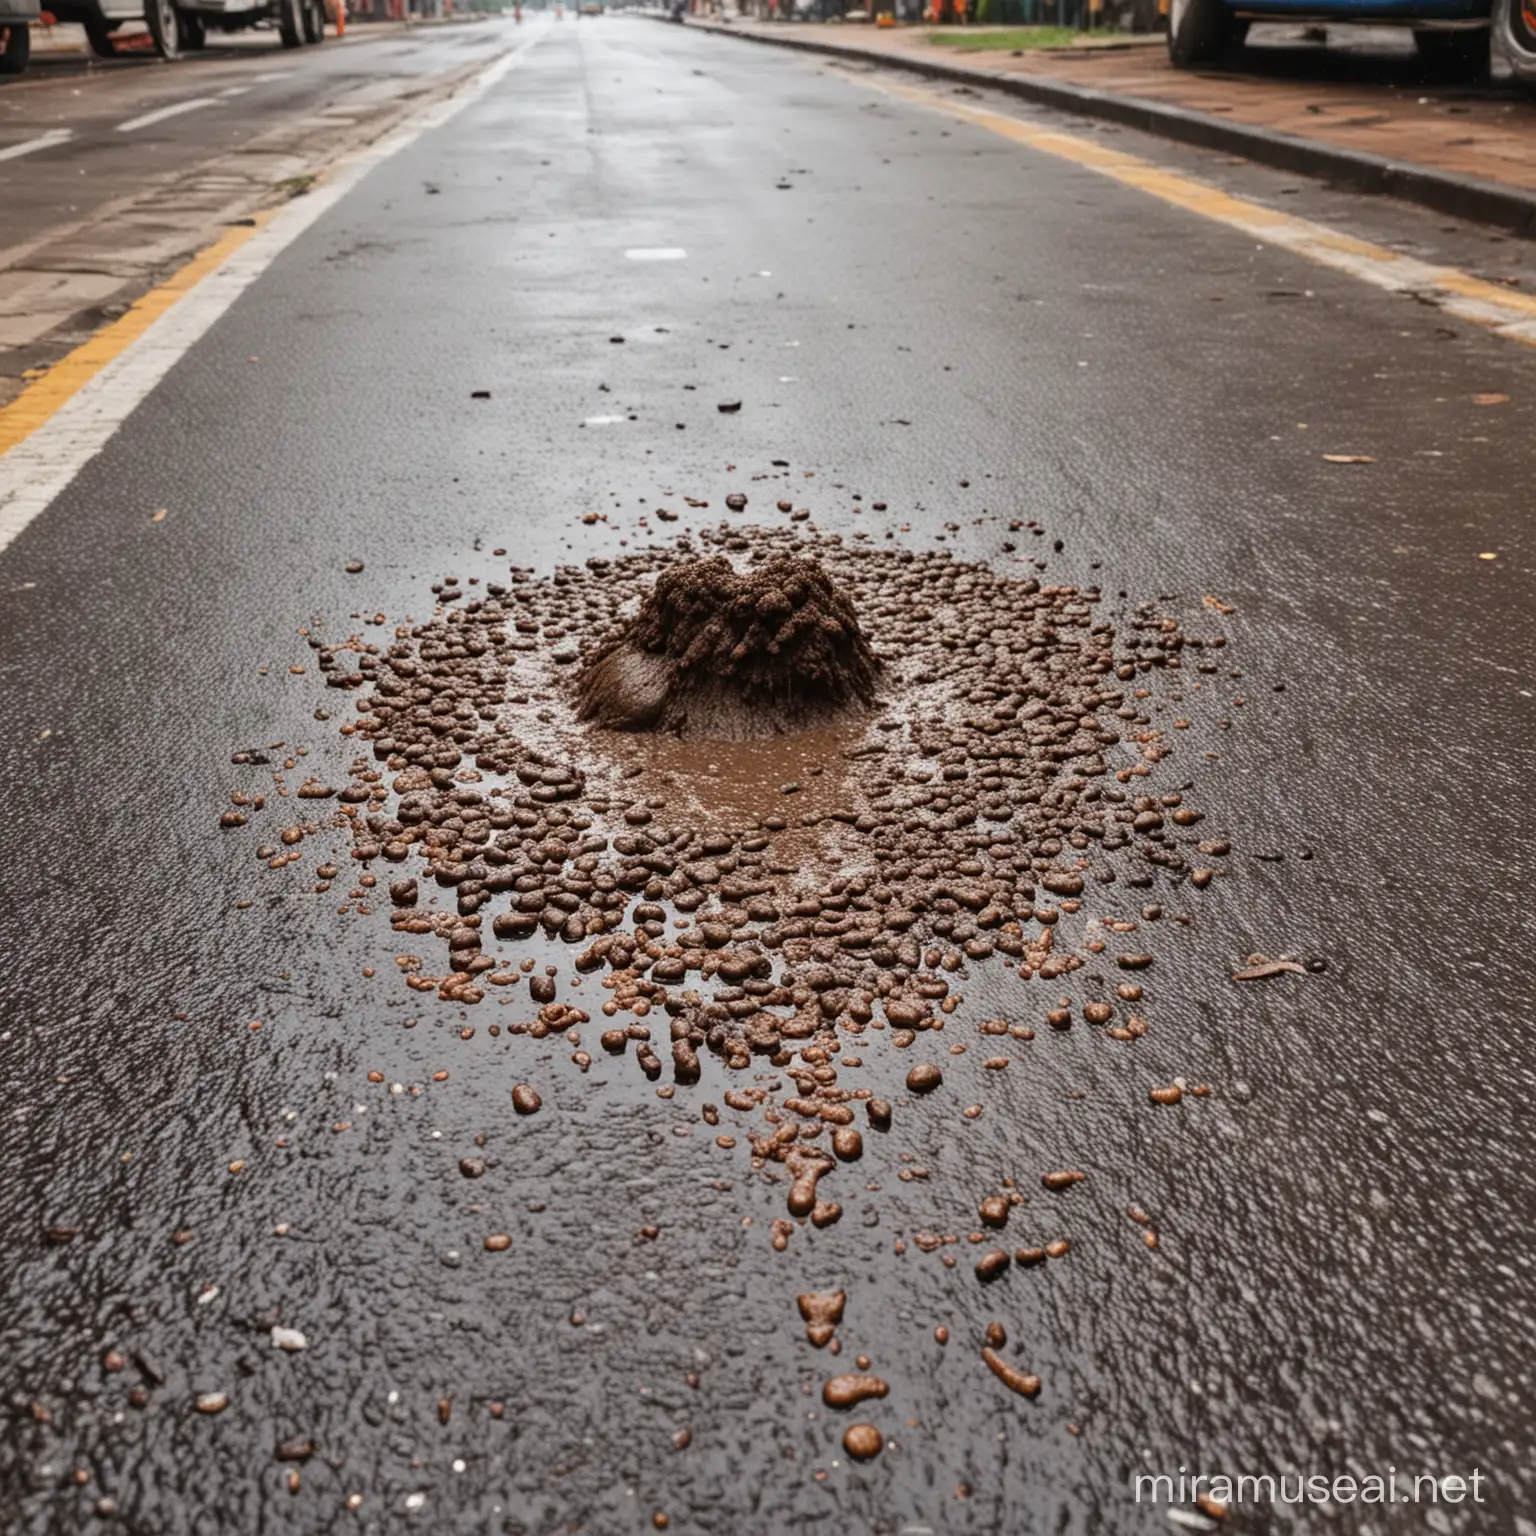 A wet poop in rainy season in open streets of india. With mud around it.